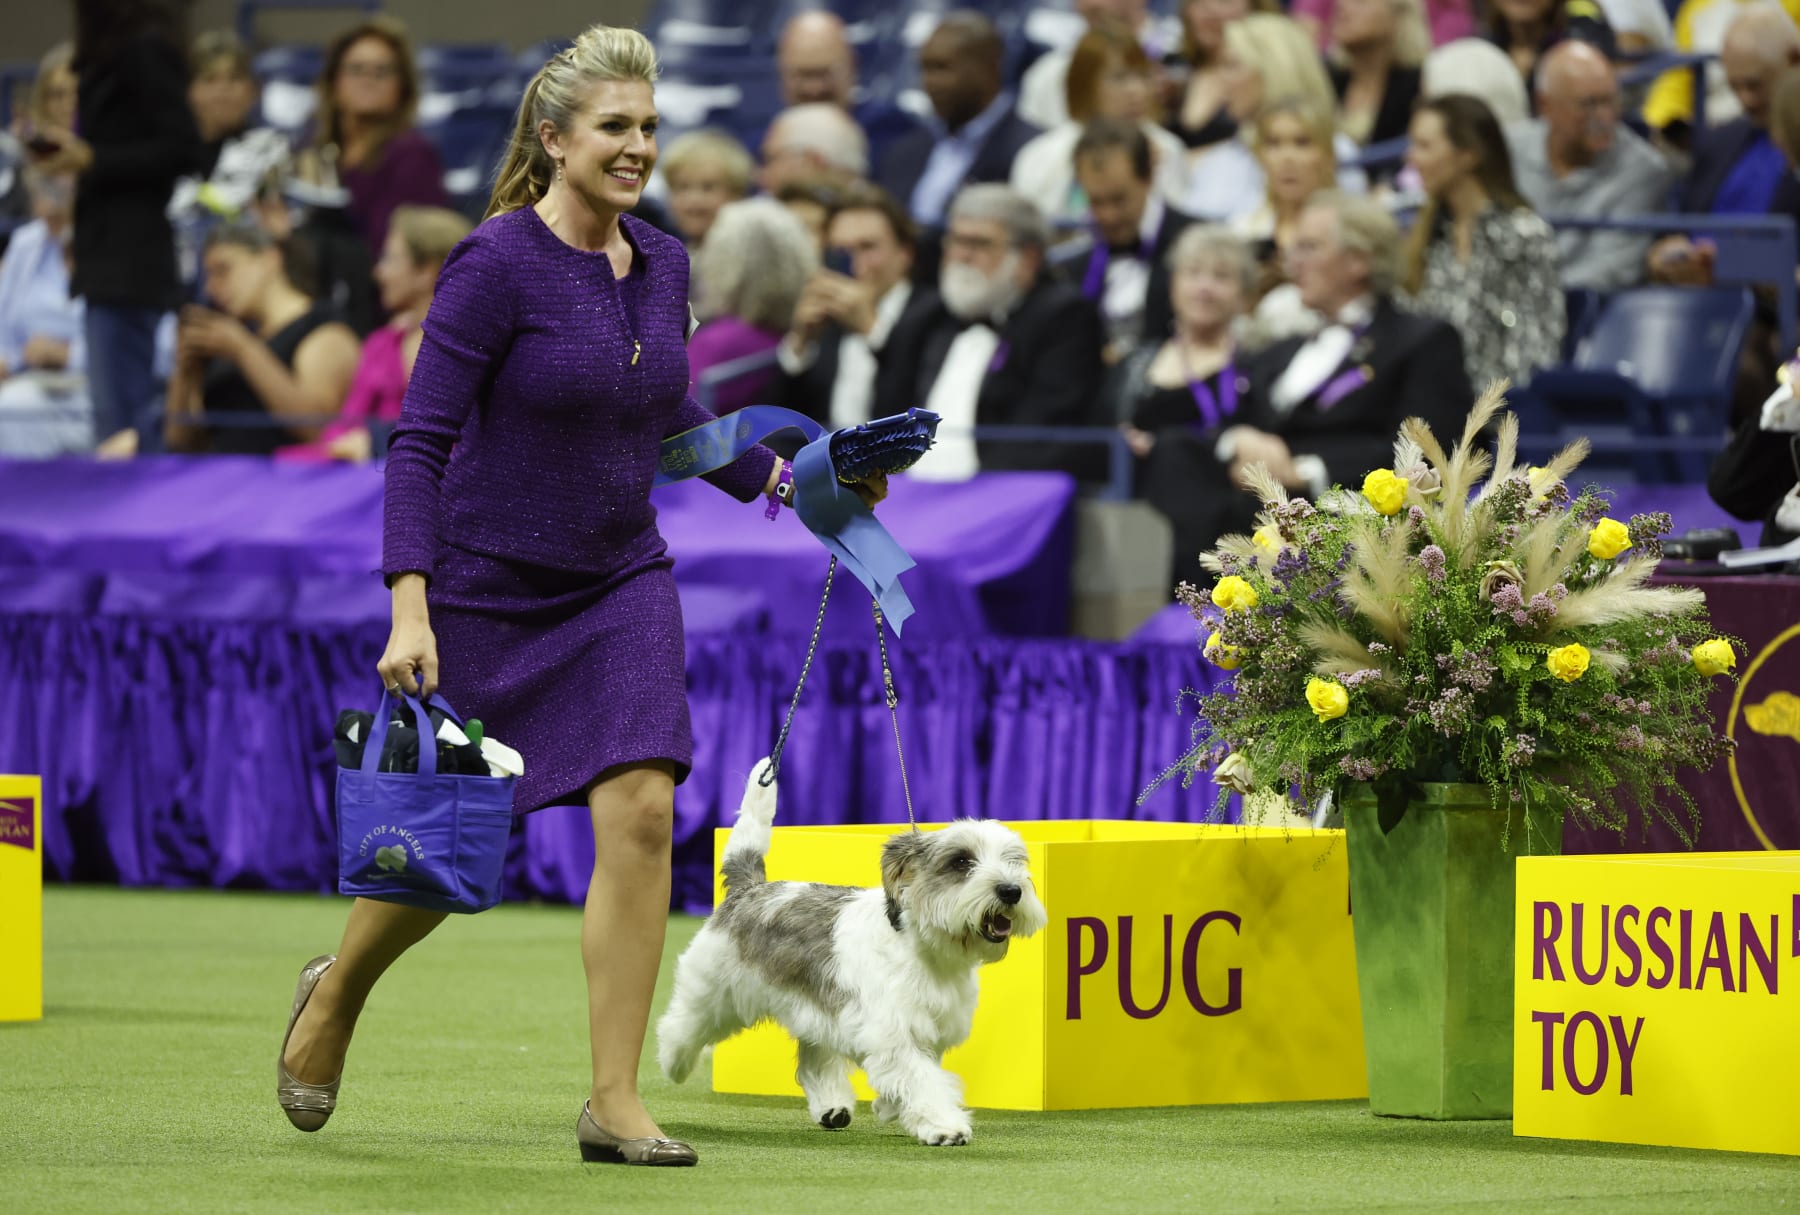 AKC rules in action at a dog show in 2022